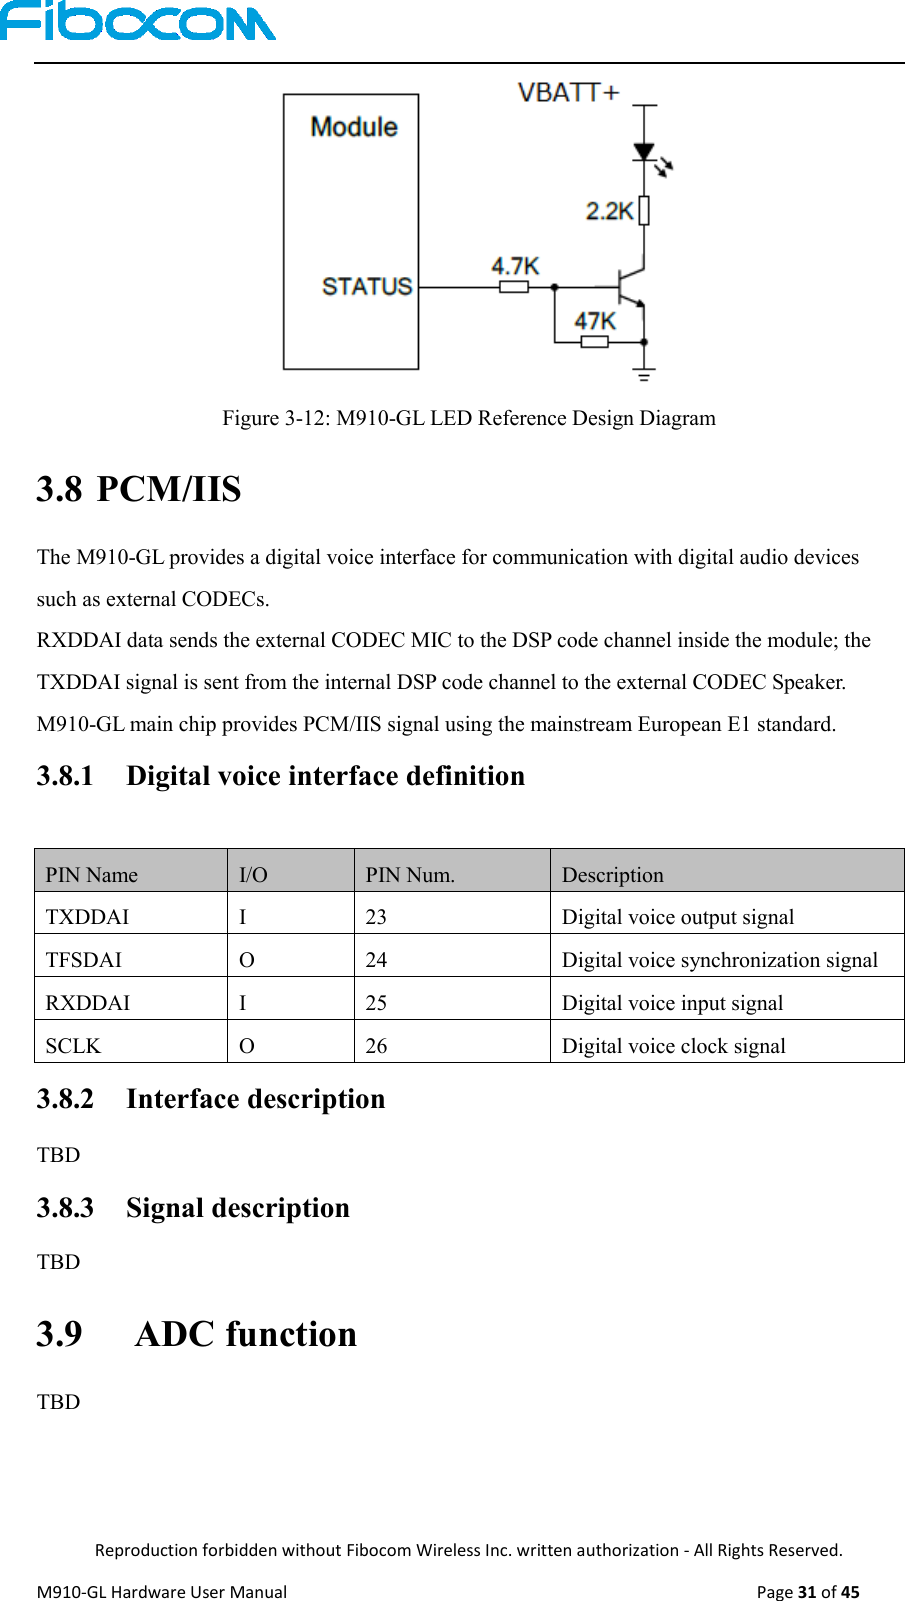  Reproduction forbidden without Fibocom Wireless Inc. written authorization - All Rights Reserved. M910-GL Hardware User Manual                                                                                                  Page 31 of 45     Figure 3-12: M910-GL LED Reference Design Diagram 3.8 PCM/IIS The M910-GL provides a digital voice interface for communication with digital audio devices such as external CODECs. RXDDAI data sends the external CODEC MIC to the DSP code channel inside the module; the TXDDAI signal is sent from the internal DSP code channel to the external CODEC Speaker. M910-GL main chip provides PCM/IIS signal using the mainstream European E1 standard. 3.8.1   Digital voice interface definition  PIN Name I/O PIN Num. Description TXDDAI I 23 Digital voice output signal TFSDAI O 24 Digital voice synchronization signal RXDDAI I 25 Digital voice input signal SCLK O 26 Digital voice clock signal 3.8.2   Interface description TBD 3.8.3   Signal description TBD 3.9   ADC function TBD 